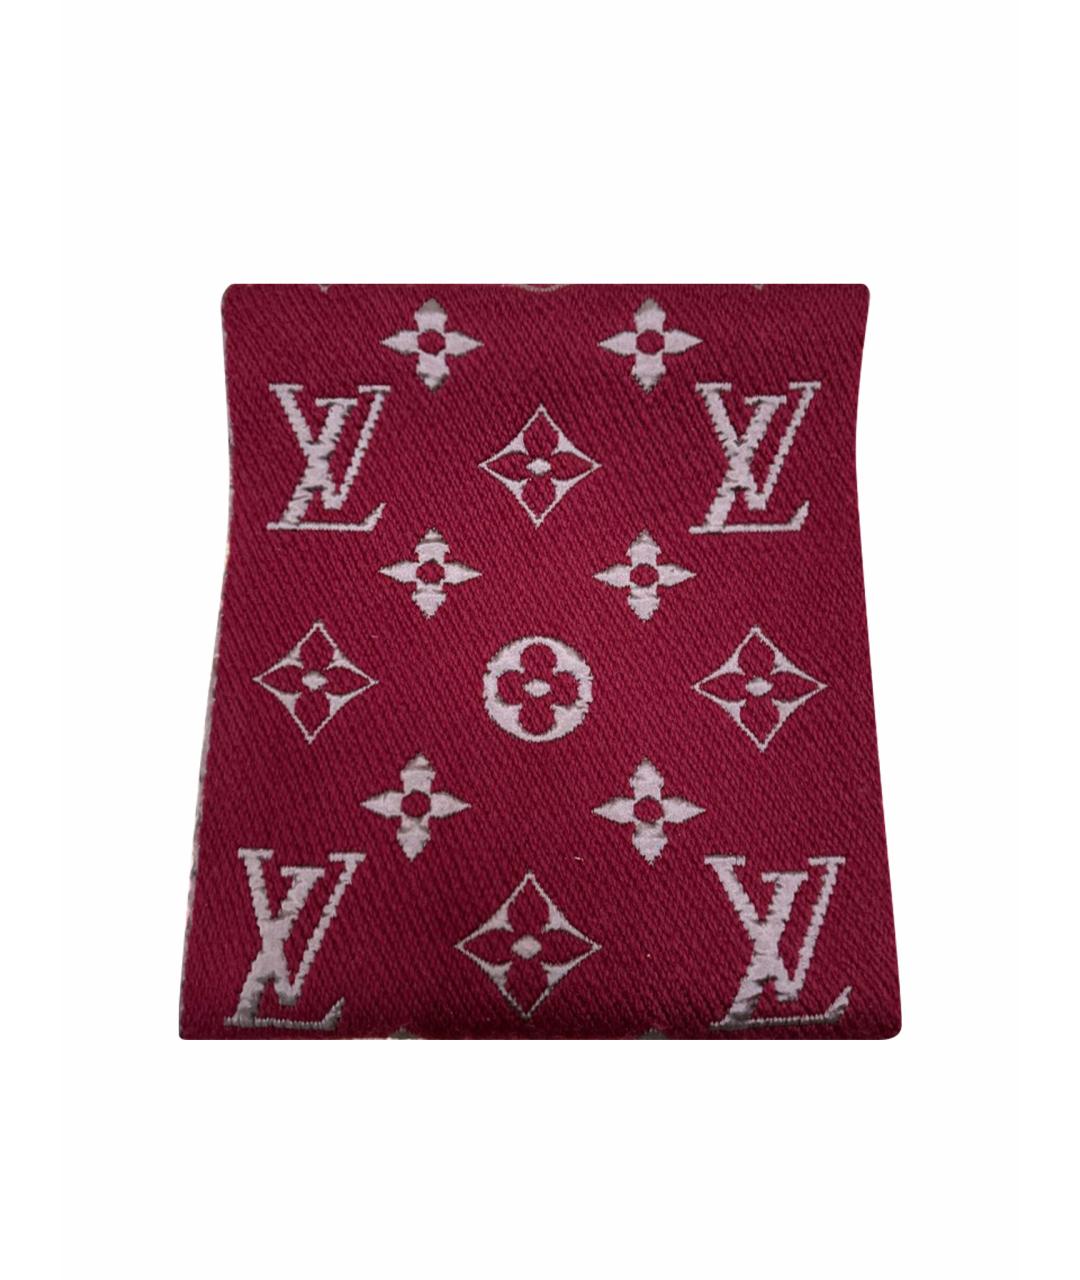 LOUIS VUITTON PRE-OWNED Бордовый шерстяной шарф, фото 1